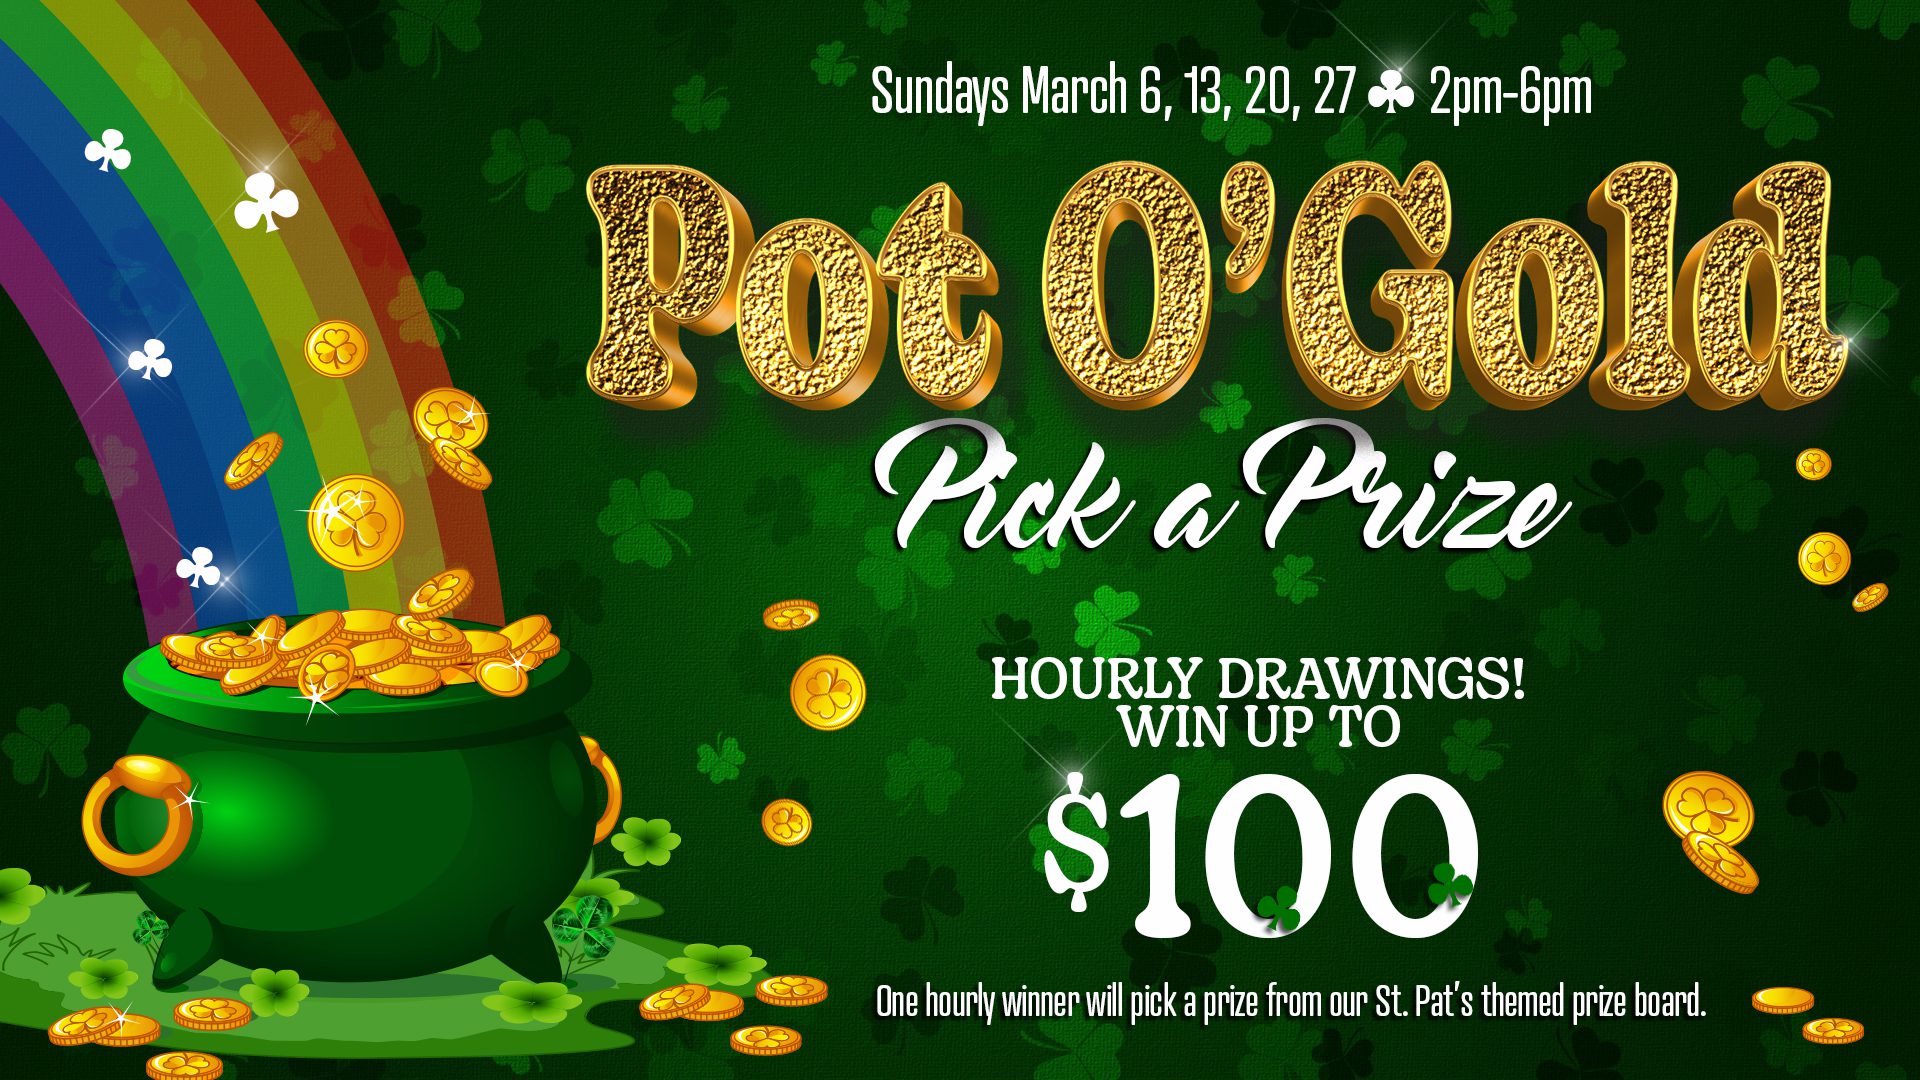 Promotional event poster for "pot o' gold pick a prize" with hourly drawings offering a chance to win up to $100.